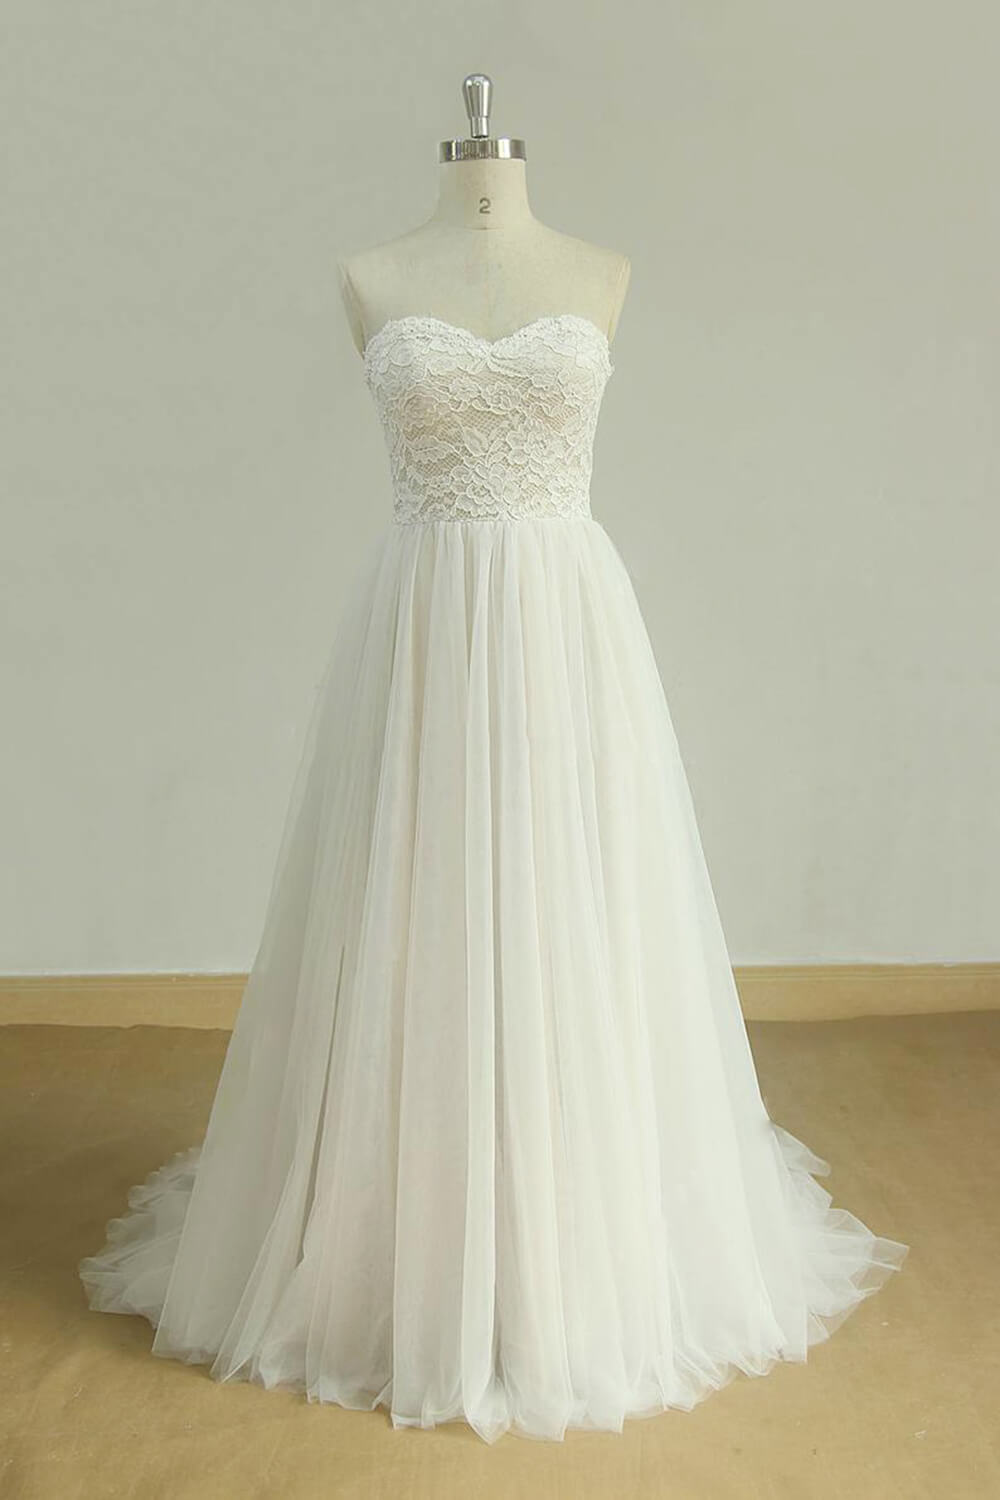 Chic Sweetheart Lace Wedding Dress White Tulle Ruffles Bridal Gowns On Sale